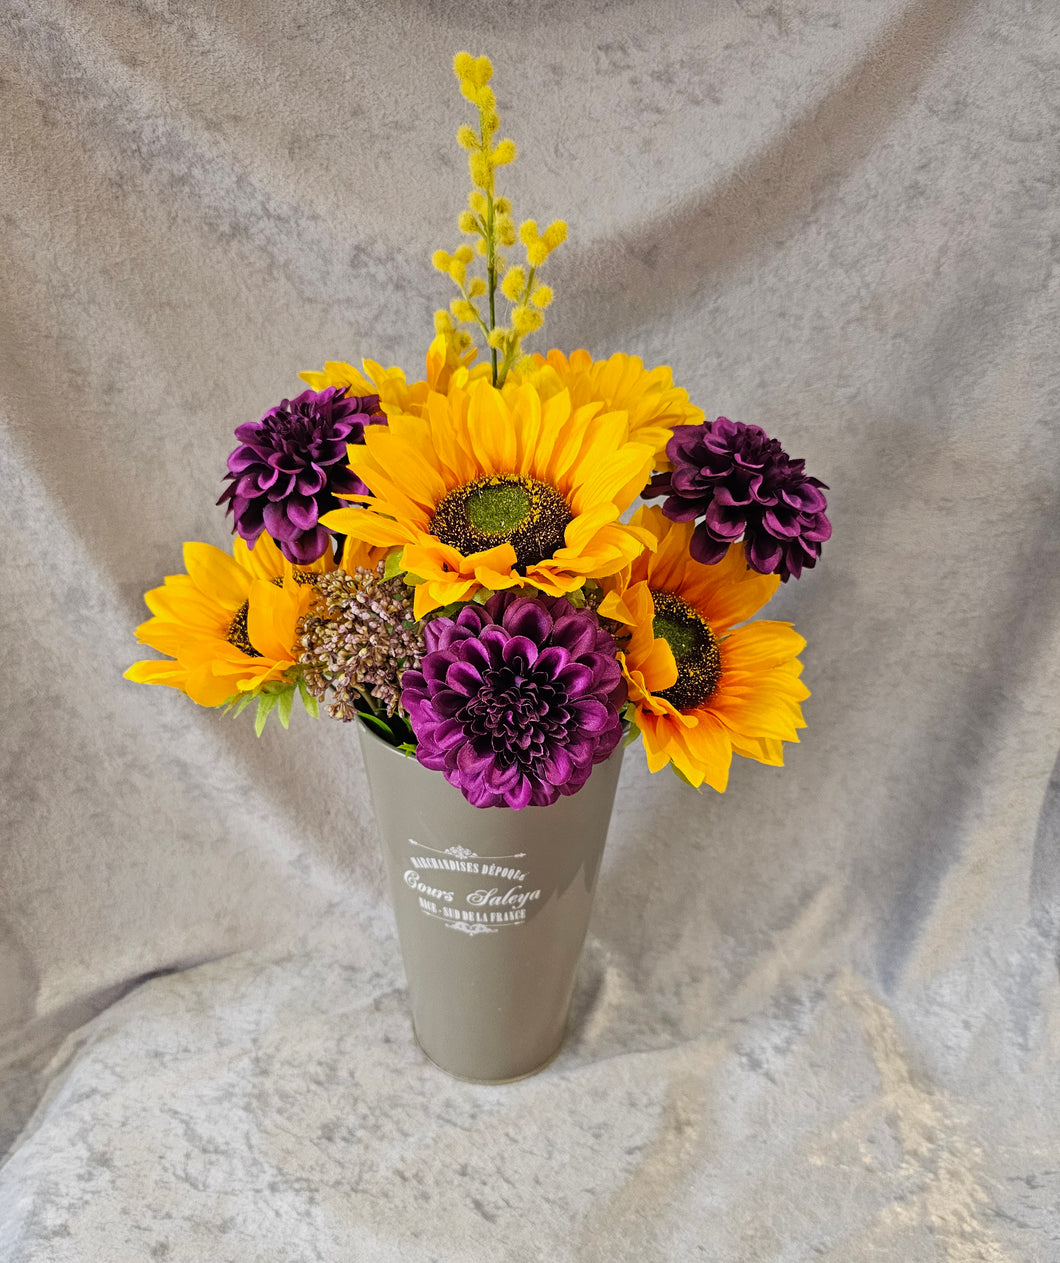 Sunflower and Dahlia Floral Display in zinc vase